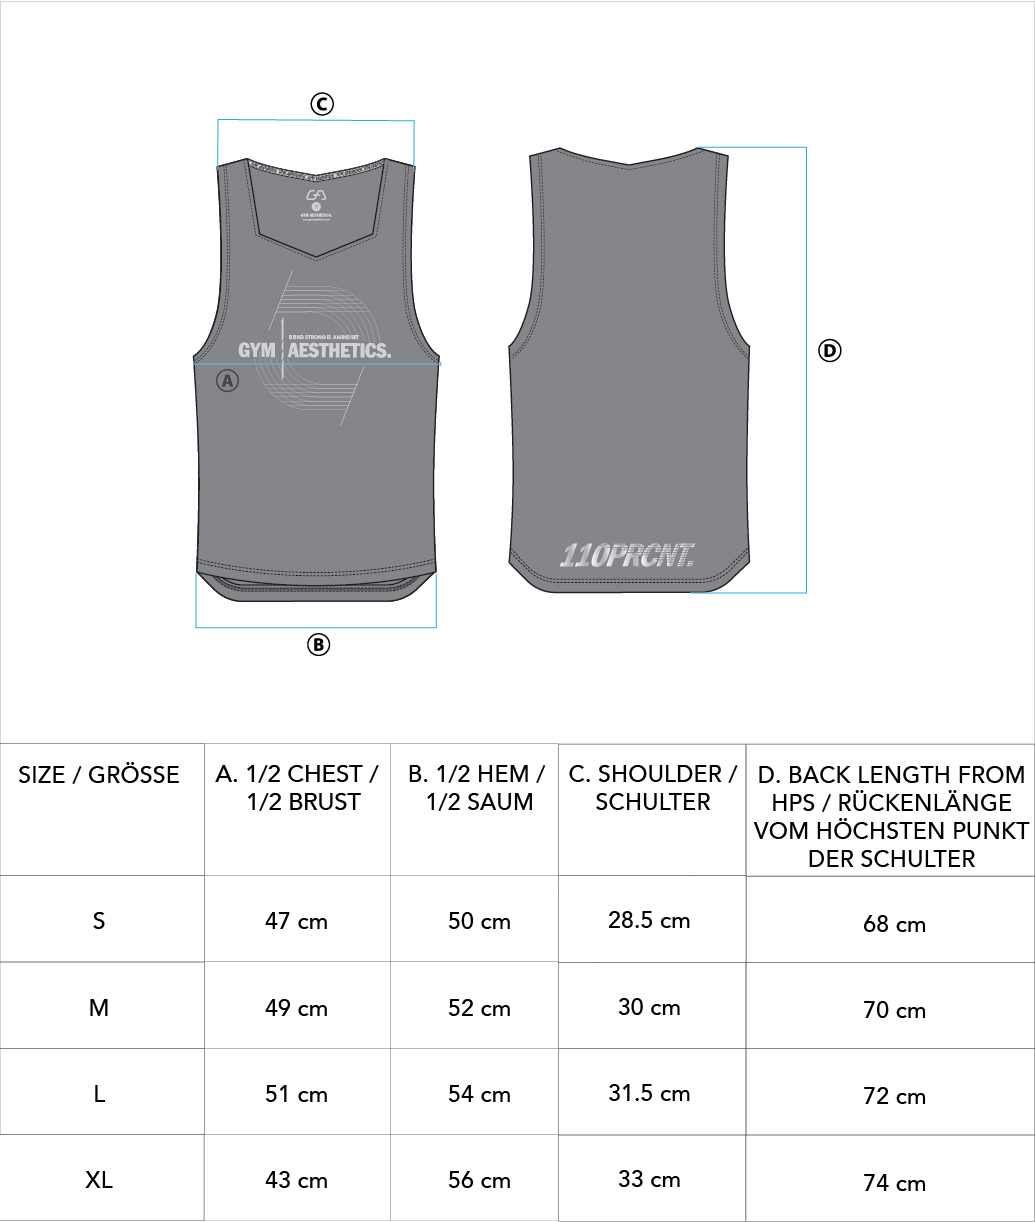 Essential Coolever Cotton Touch Gym Stringer for Men - size chart | Gym Aesthetics